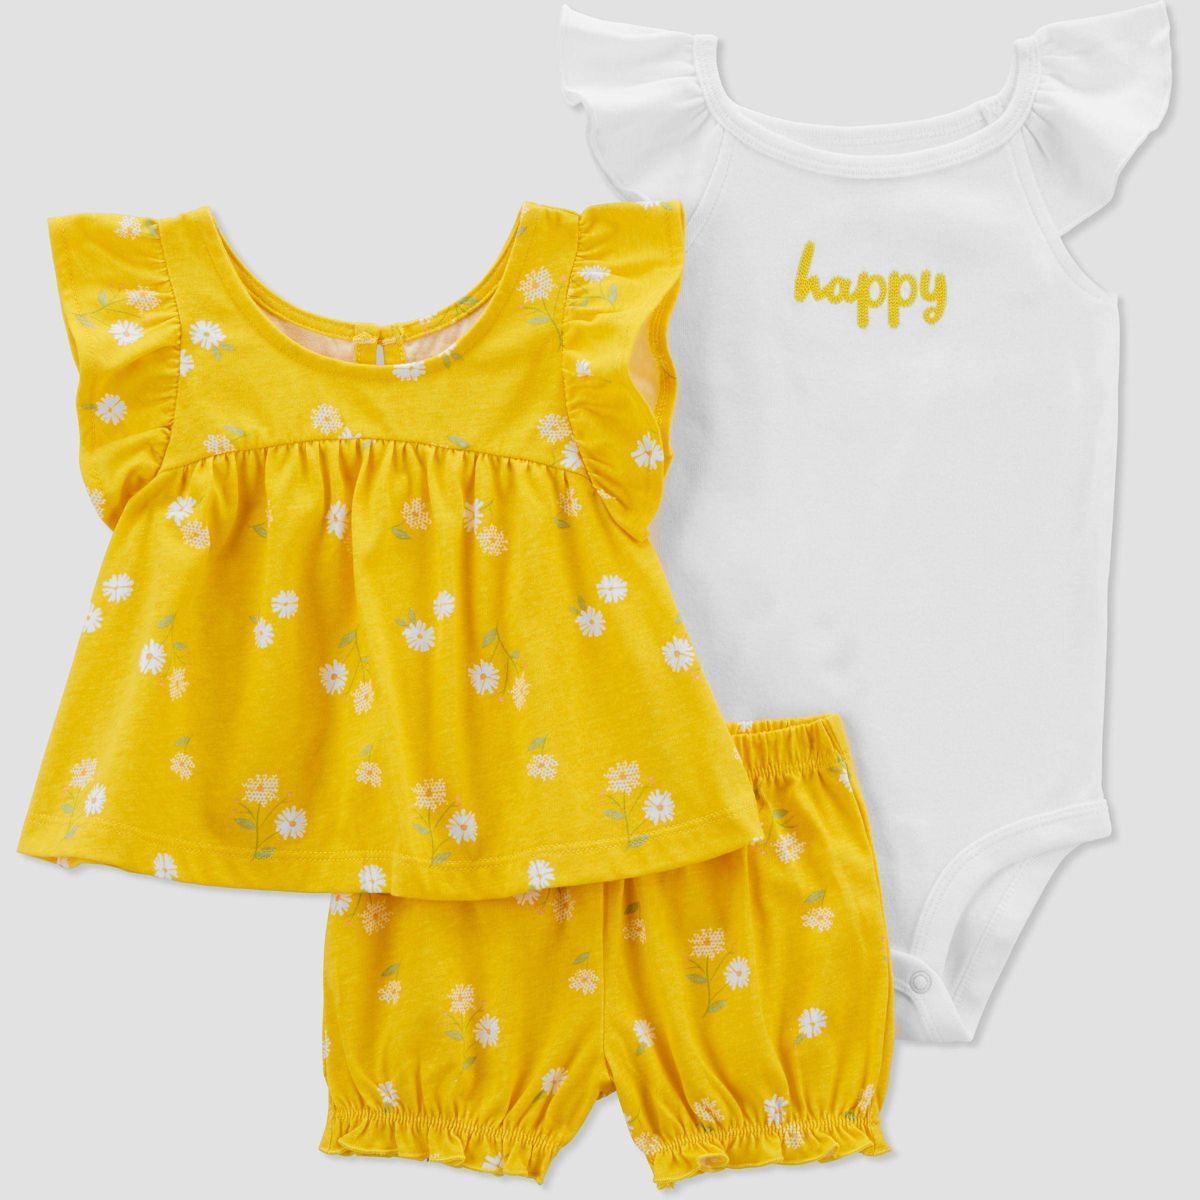 Carter's Just One You® Baby Girls' Bright Floral Top & Bottom Set - Yellow | Target